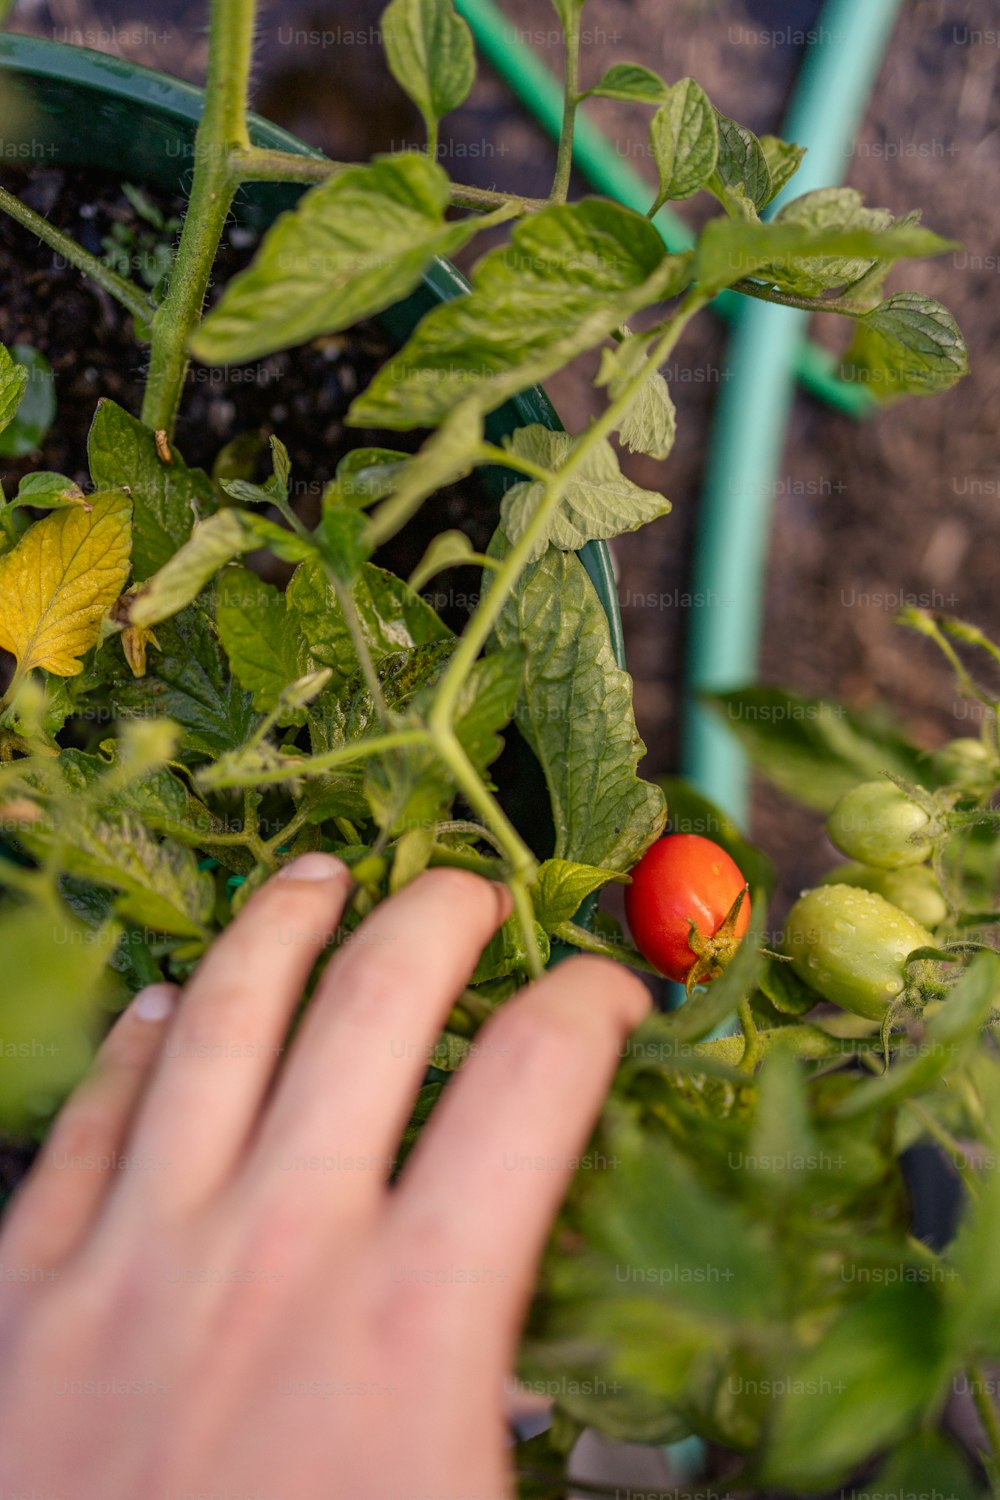 a hand reaching for a tomato on a plant